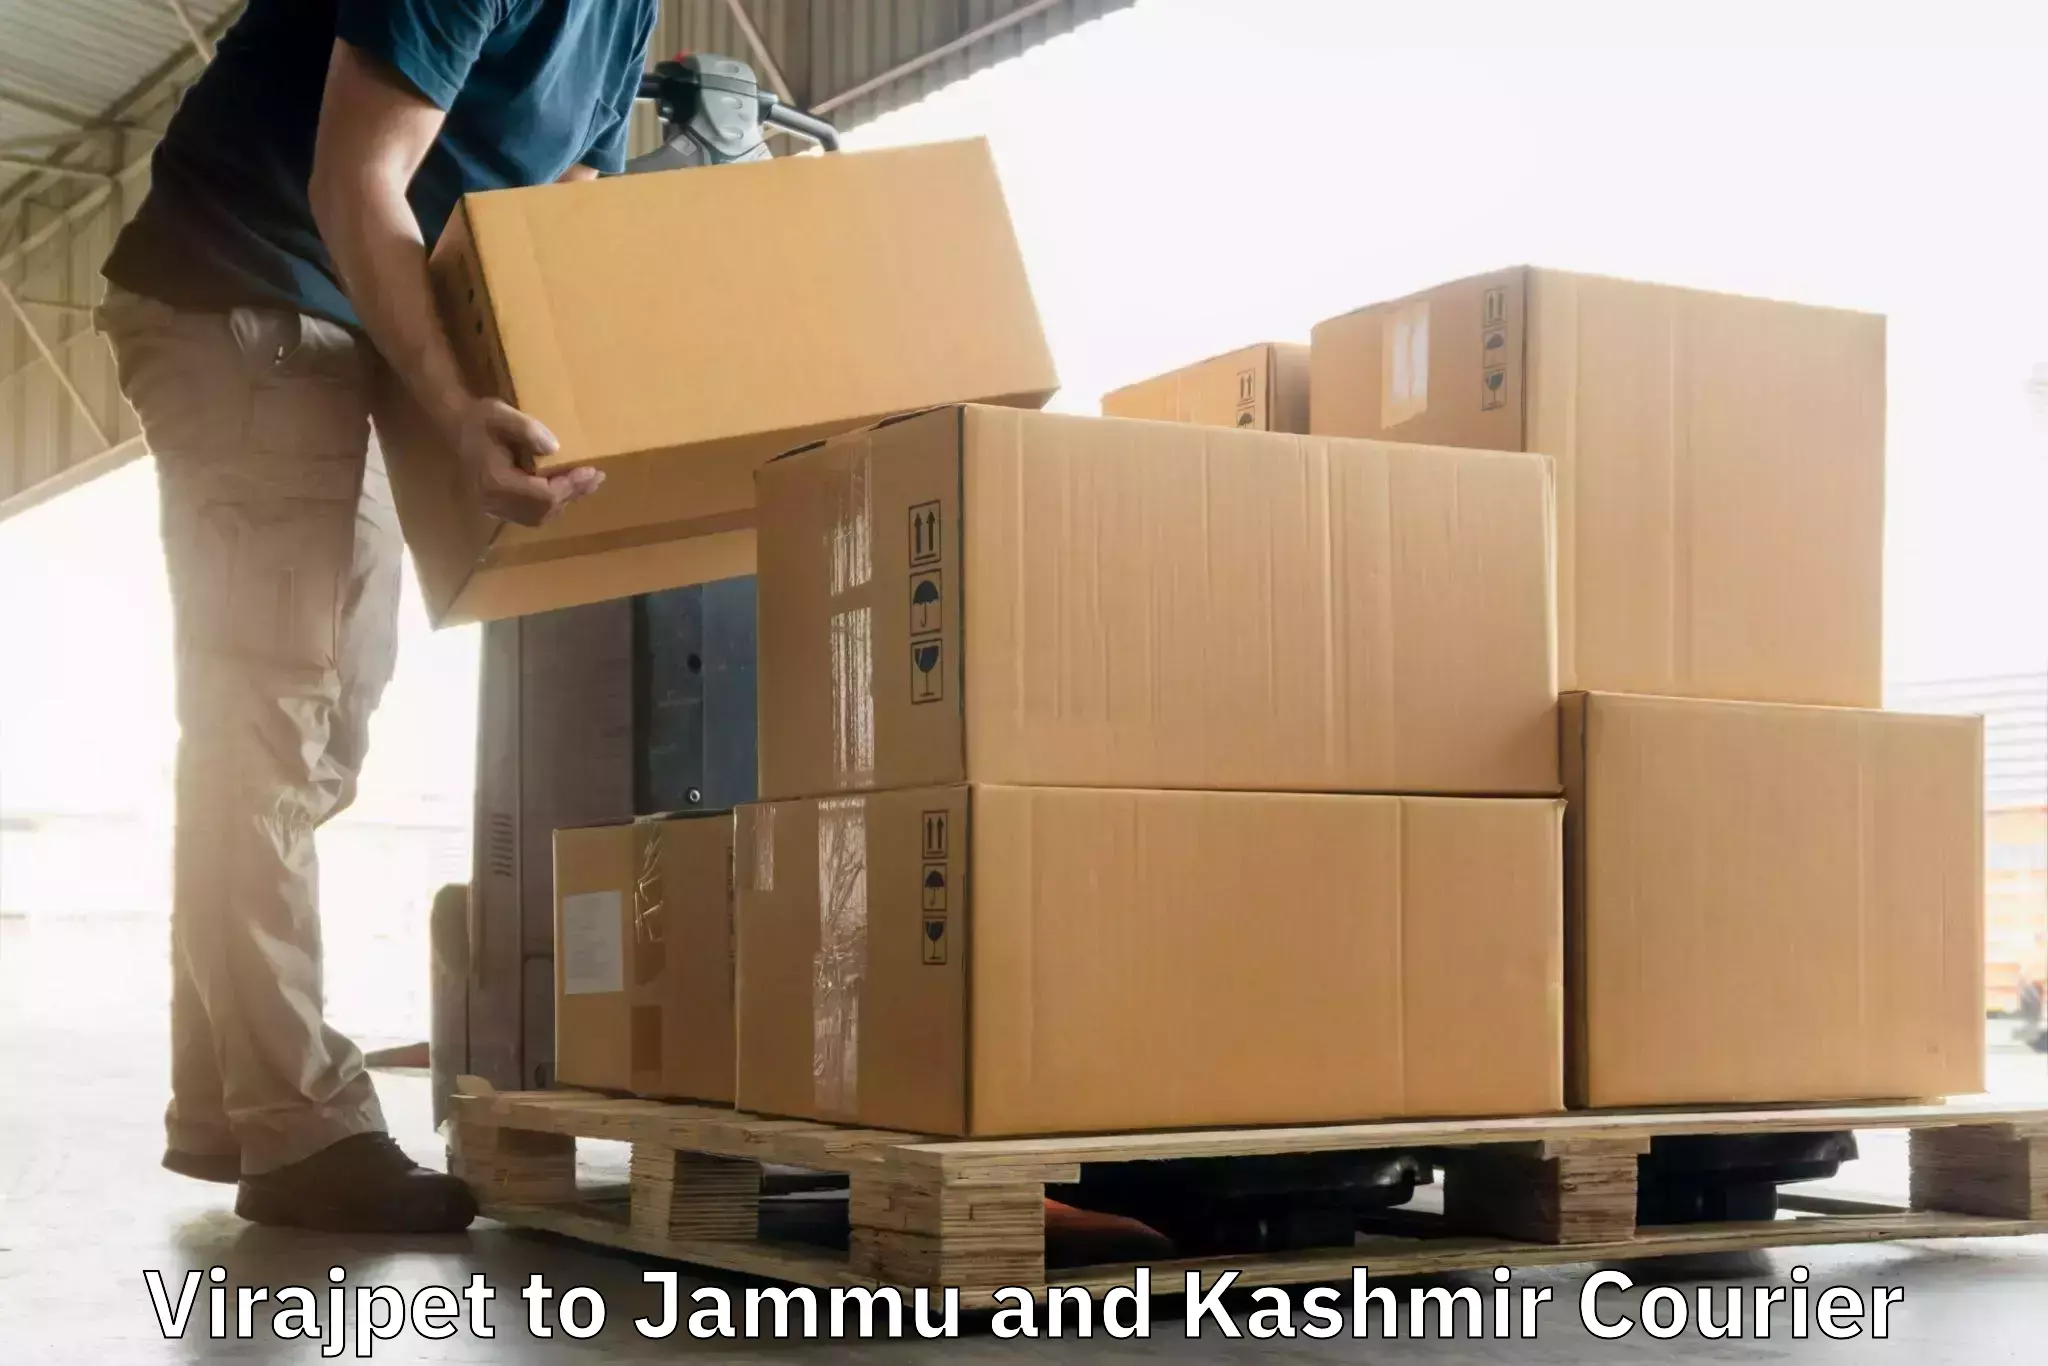 Nationwide parcel services Virajpet to Jammu and Kashmir